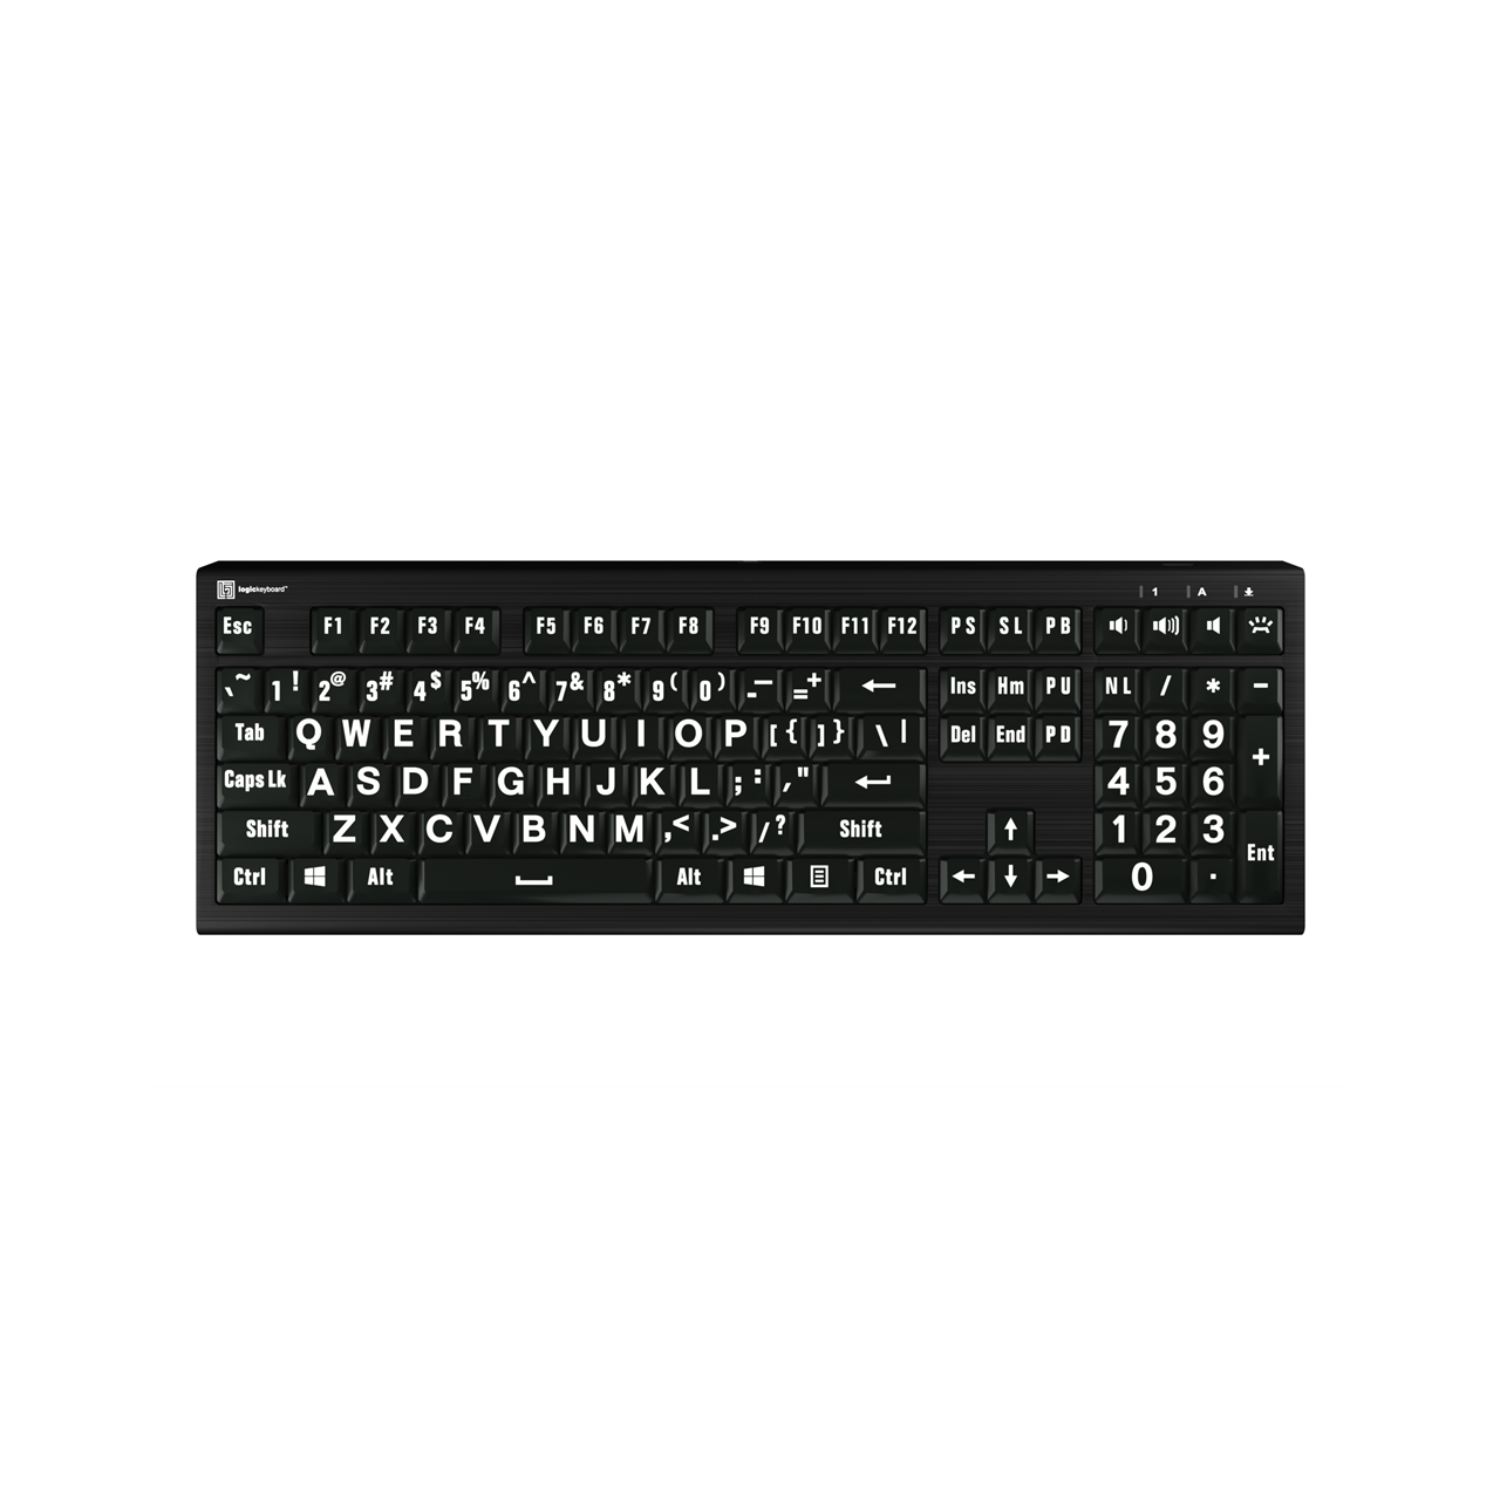 Image of the Astra 2 largeprint backlit white on black keyboard from LogicKeyboard.